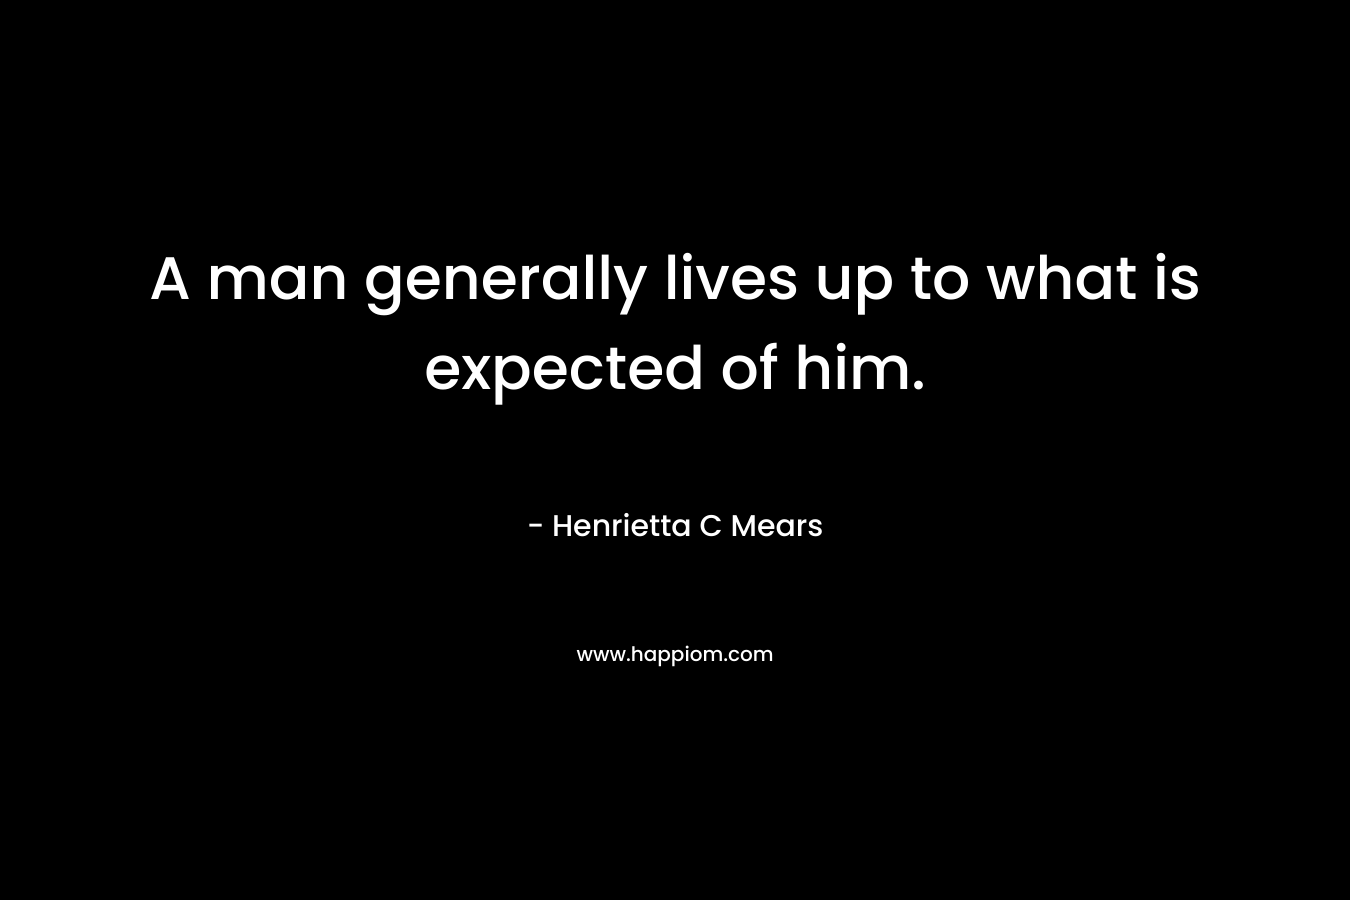 A man generally lives up to what is expected of him. – Henrietta C Mears